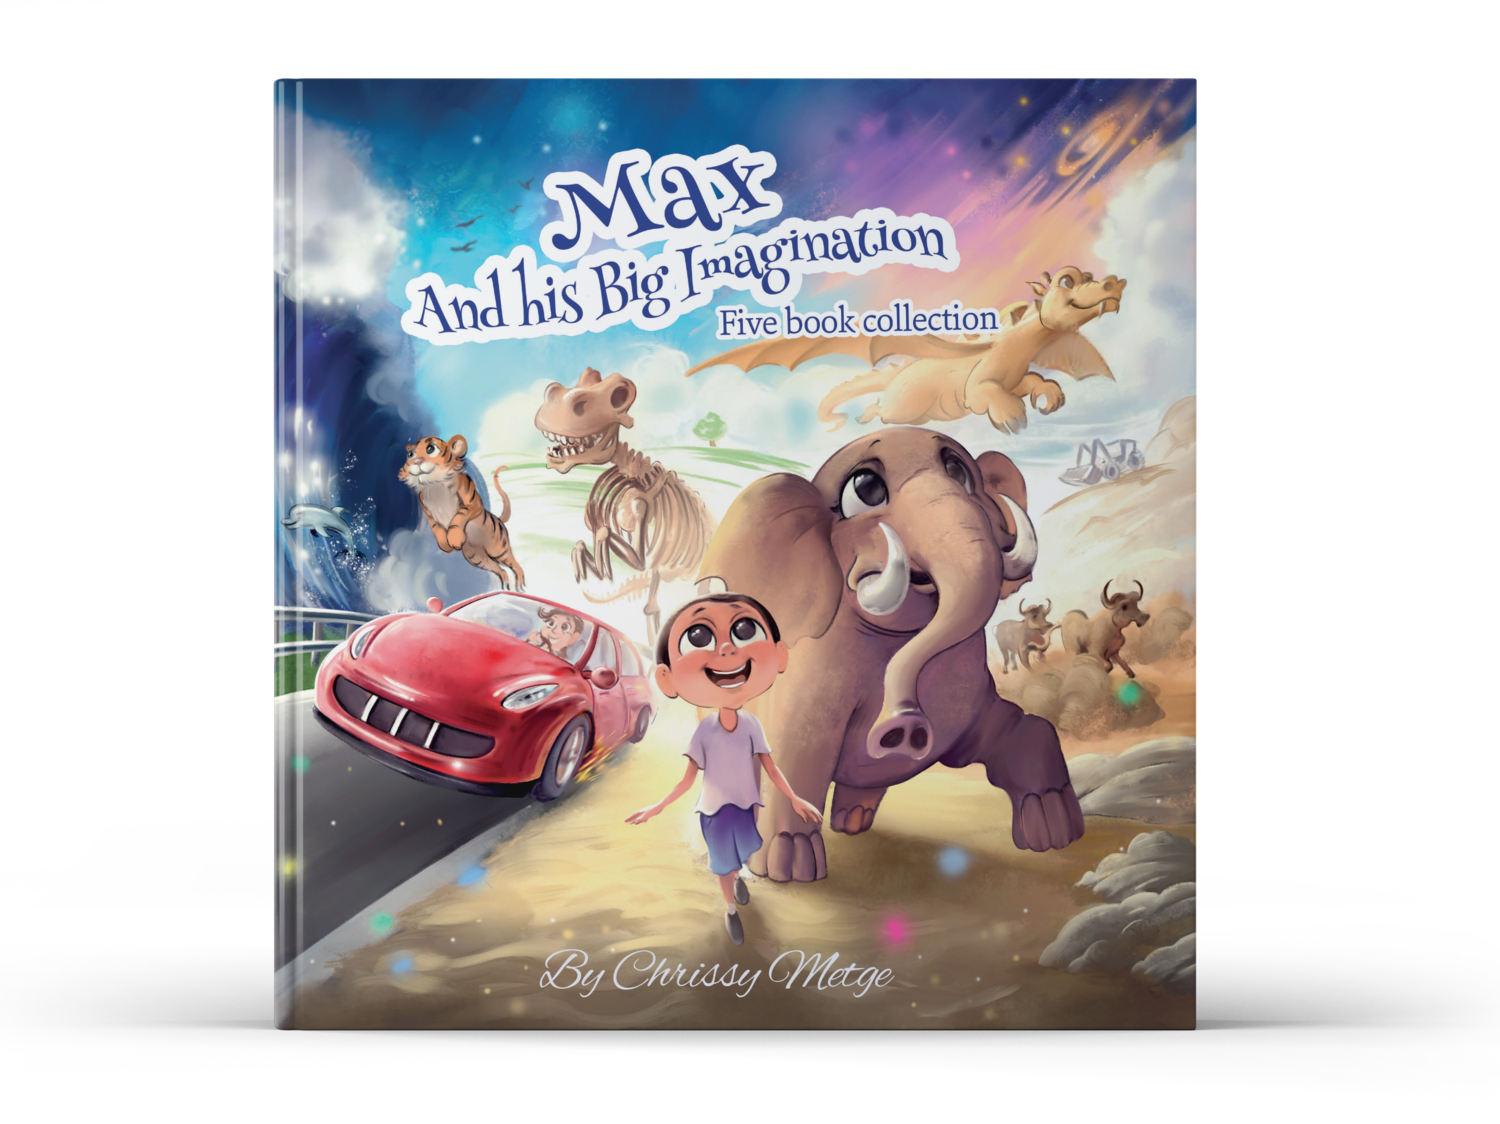 Max and his Big Imagination: Five book collection - Volume 1